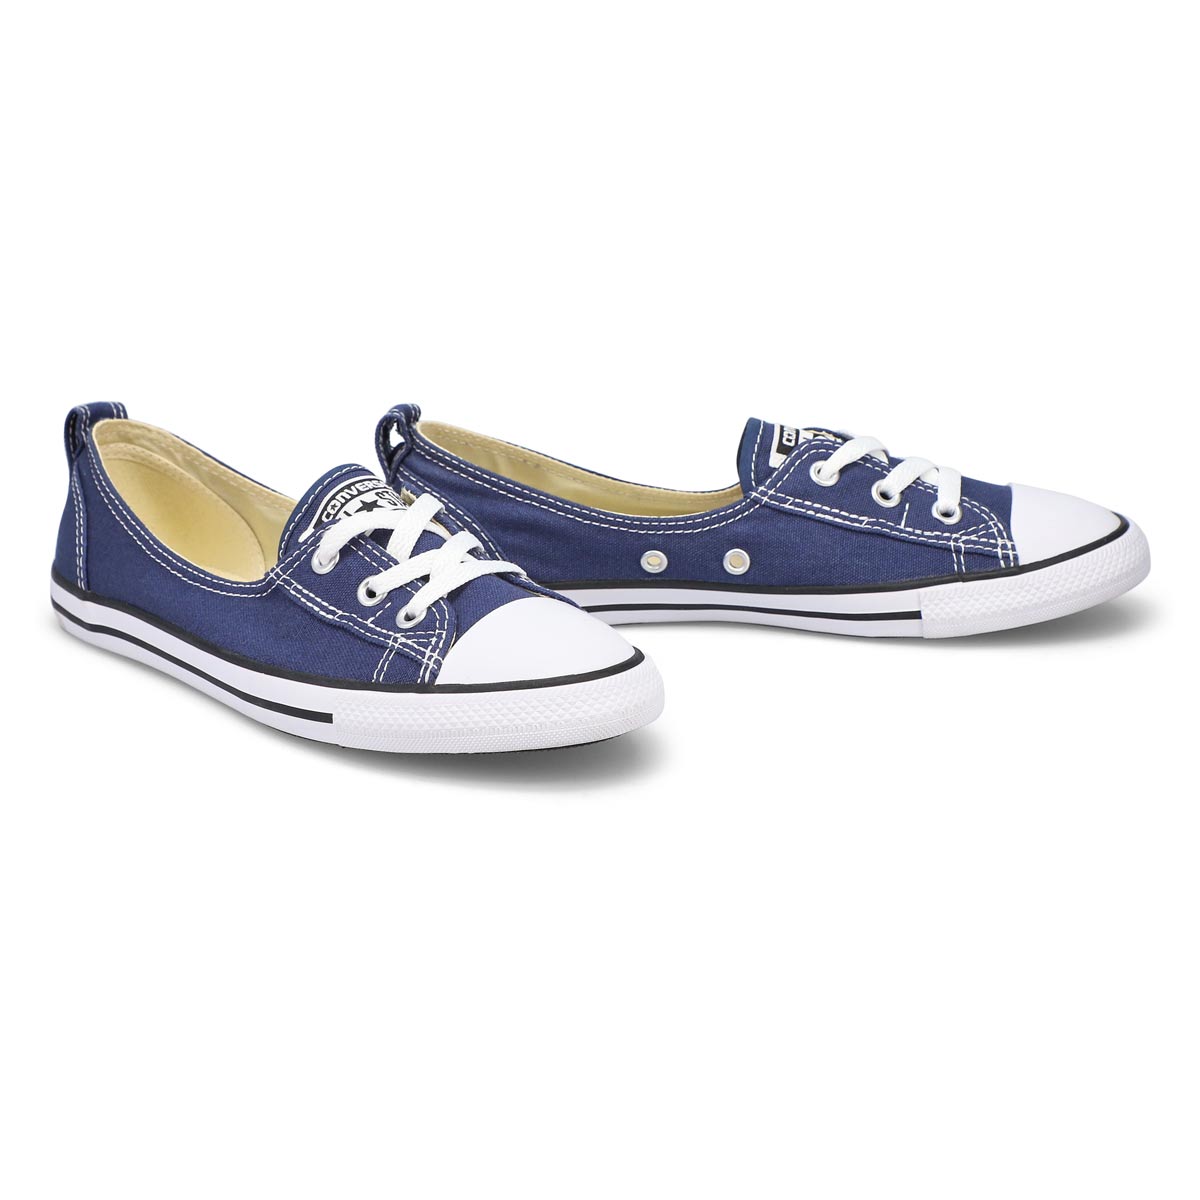 converse all star shoes slip on